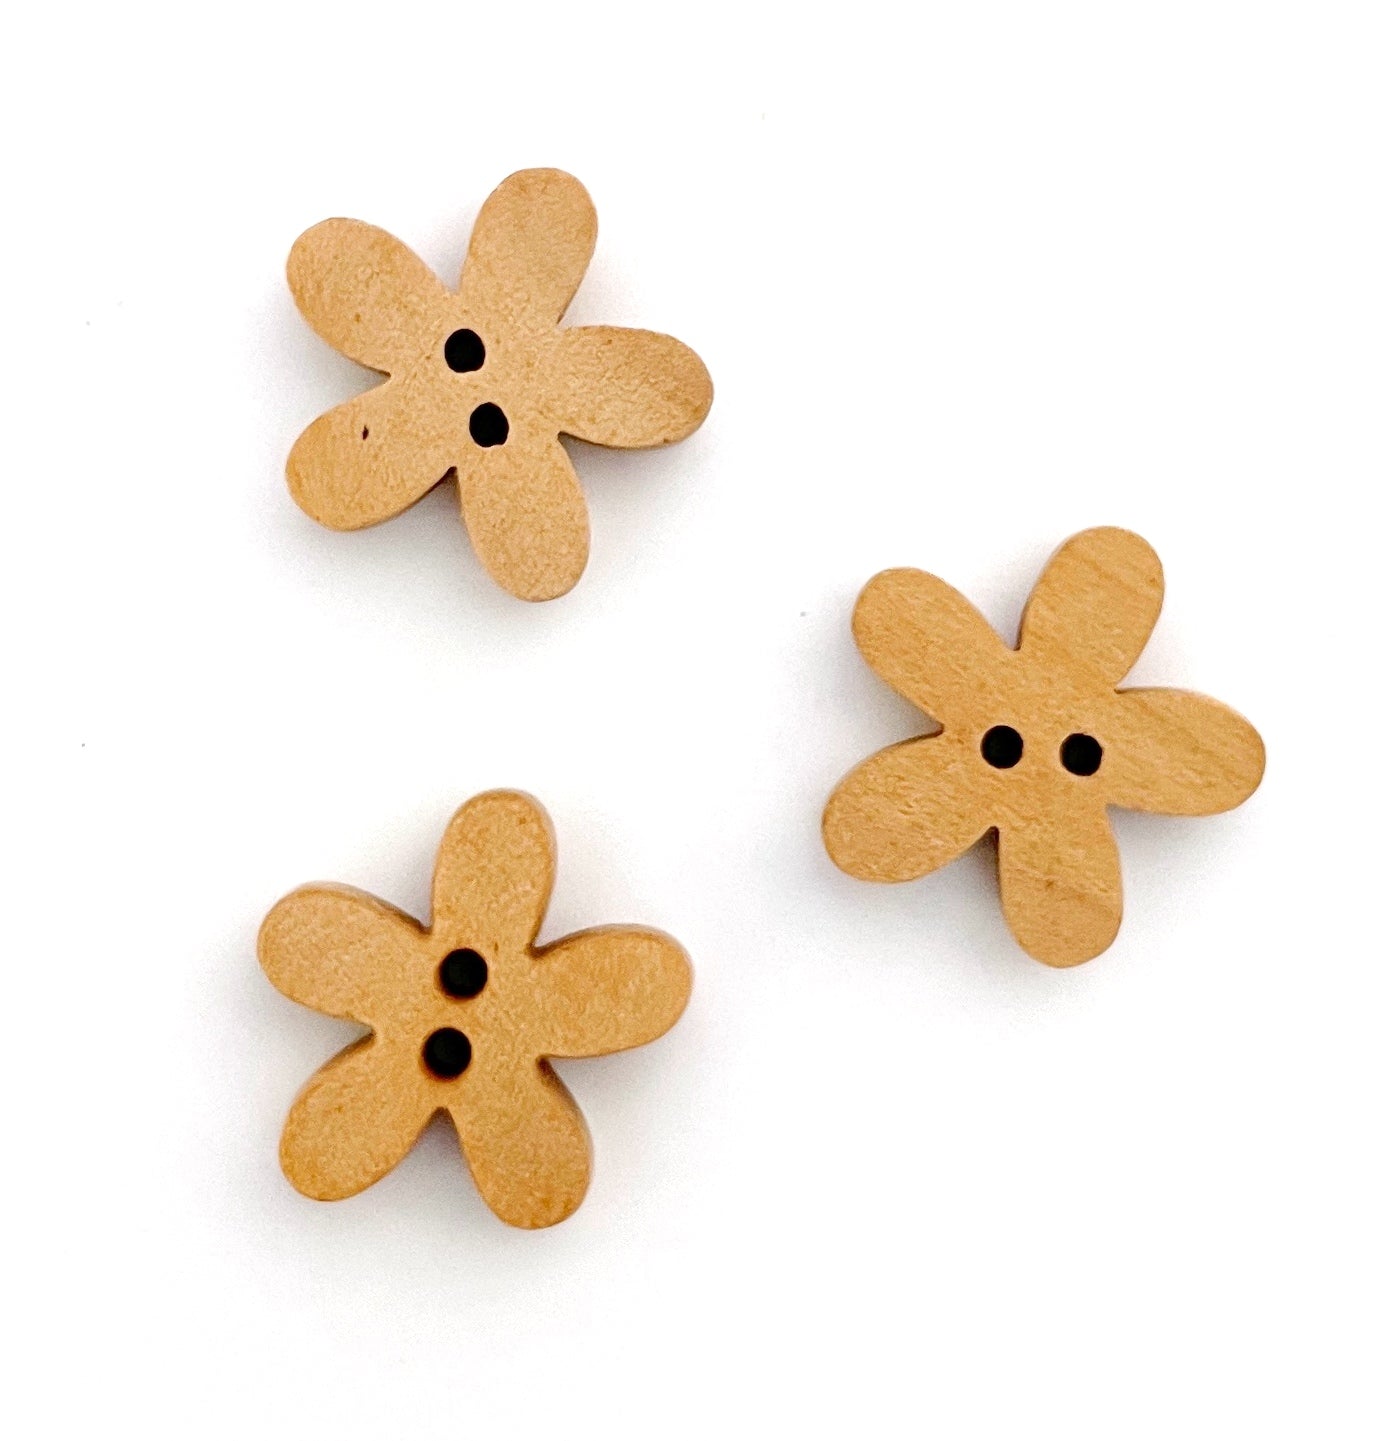 Fancy Wooden buttons - pack of 5 - DWB03